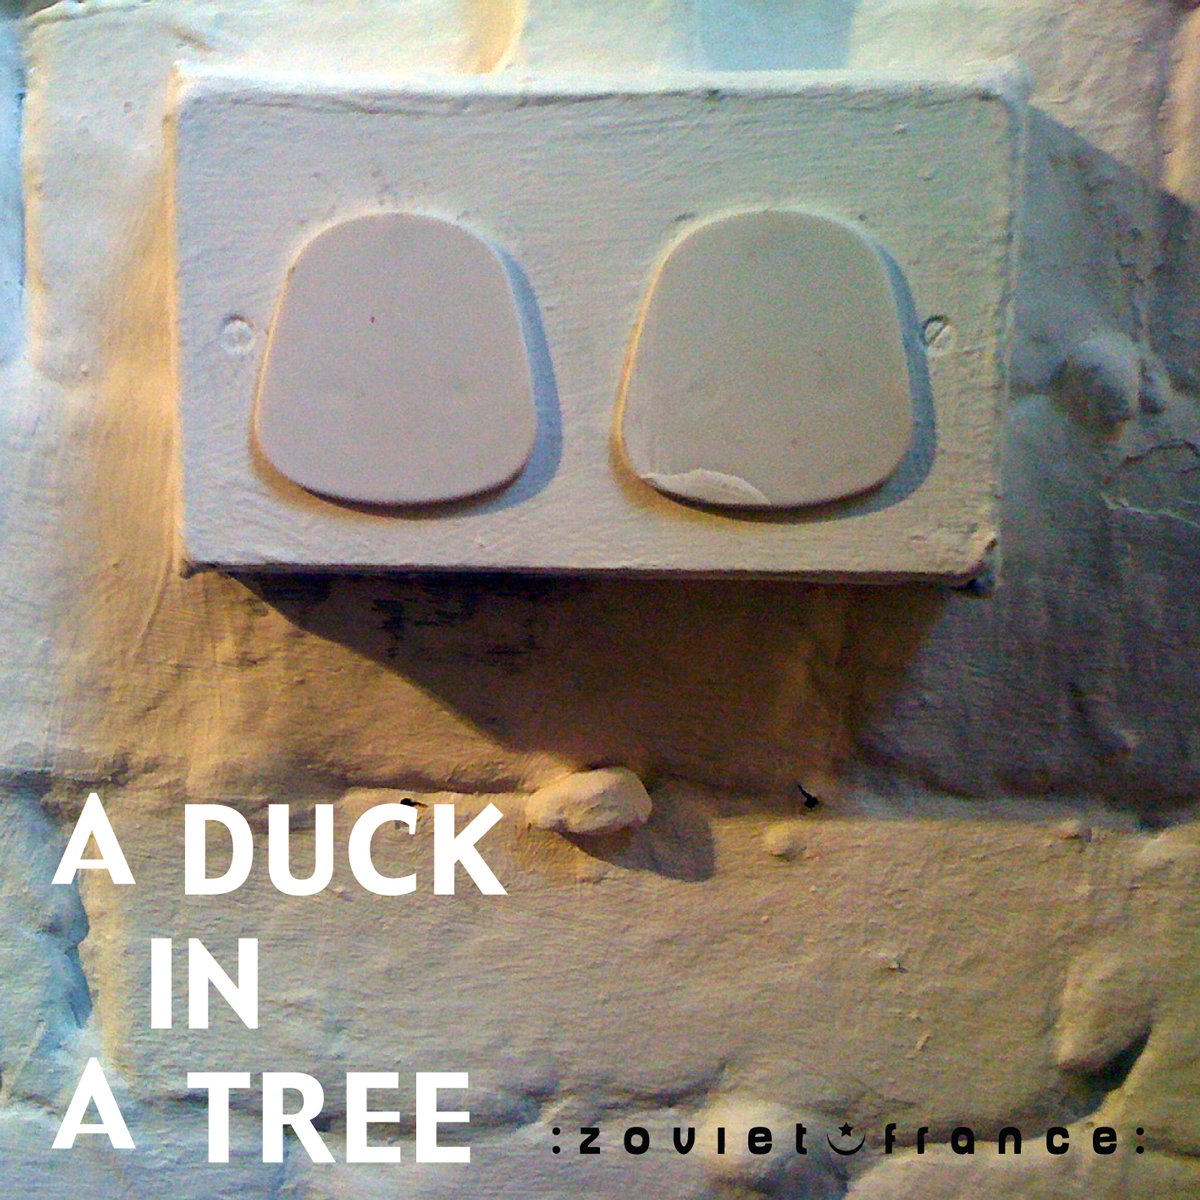 A-Duck-in-a-Tree-2012-12-15-_-The-Owl-Hoots-Three-Times-layout-1200.jpg